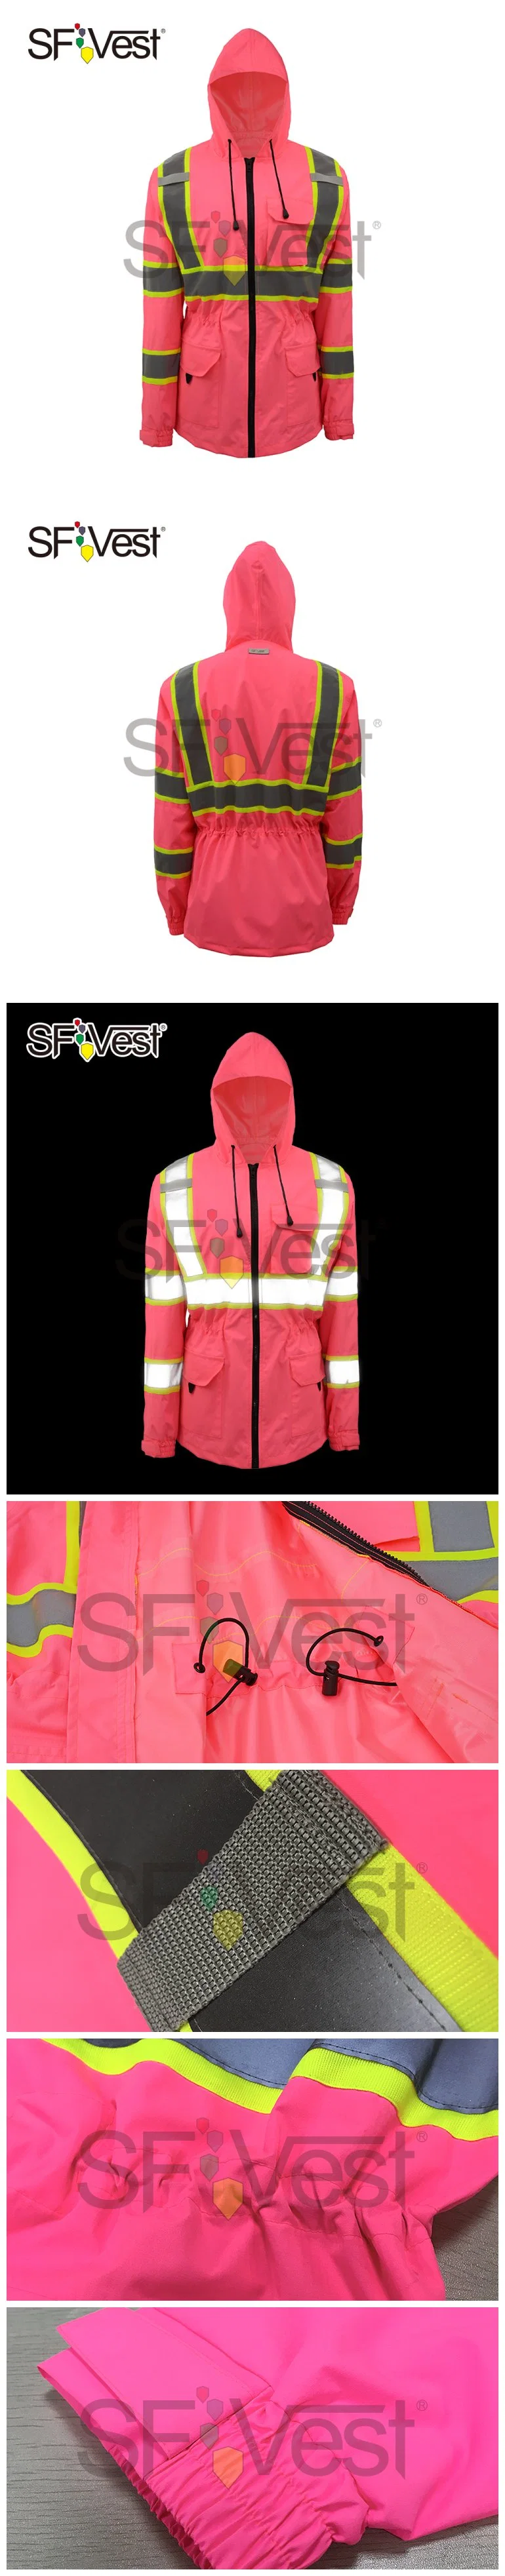 2020 Manufacturer New Style Protection Roadway Pink Small Size Waterproof Jacket Safety Reflective Clothing